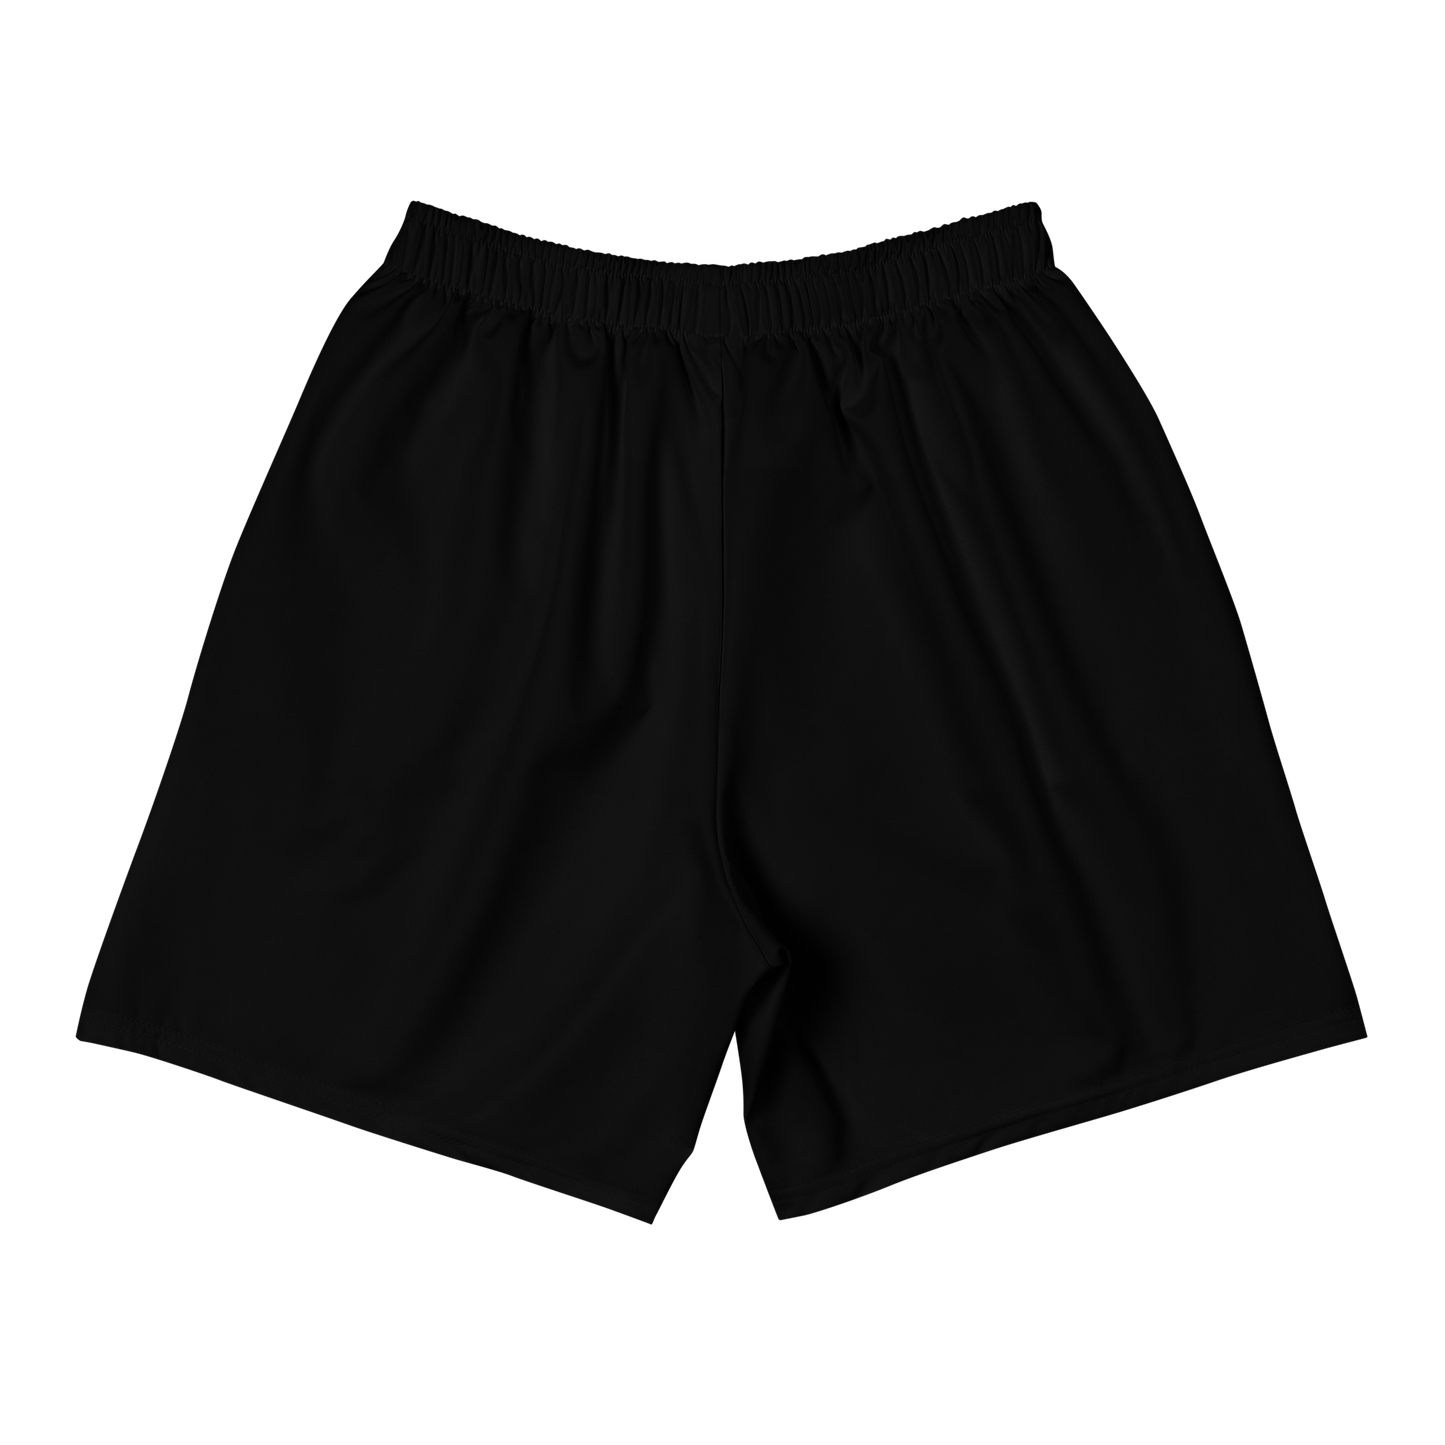 KENDALL WILLIAMS ATHLETIC SHORTS